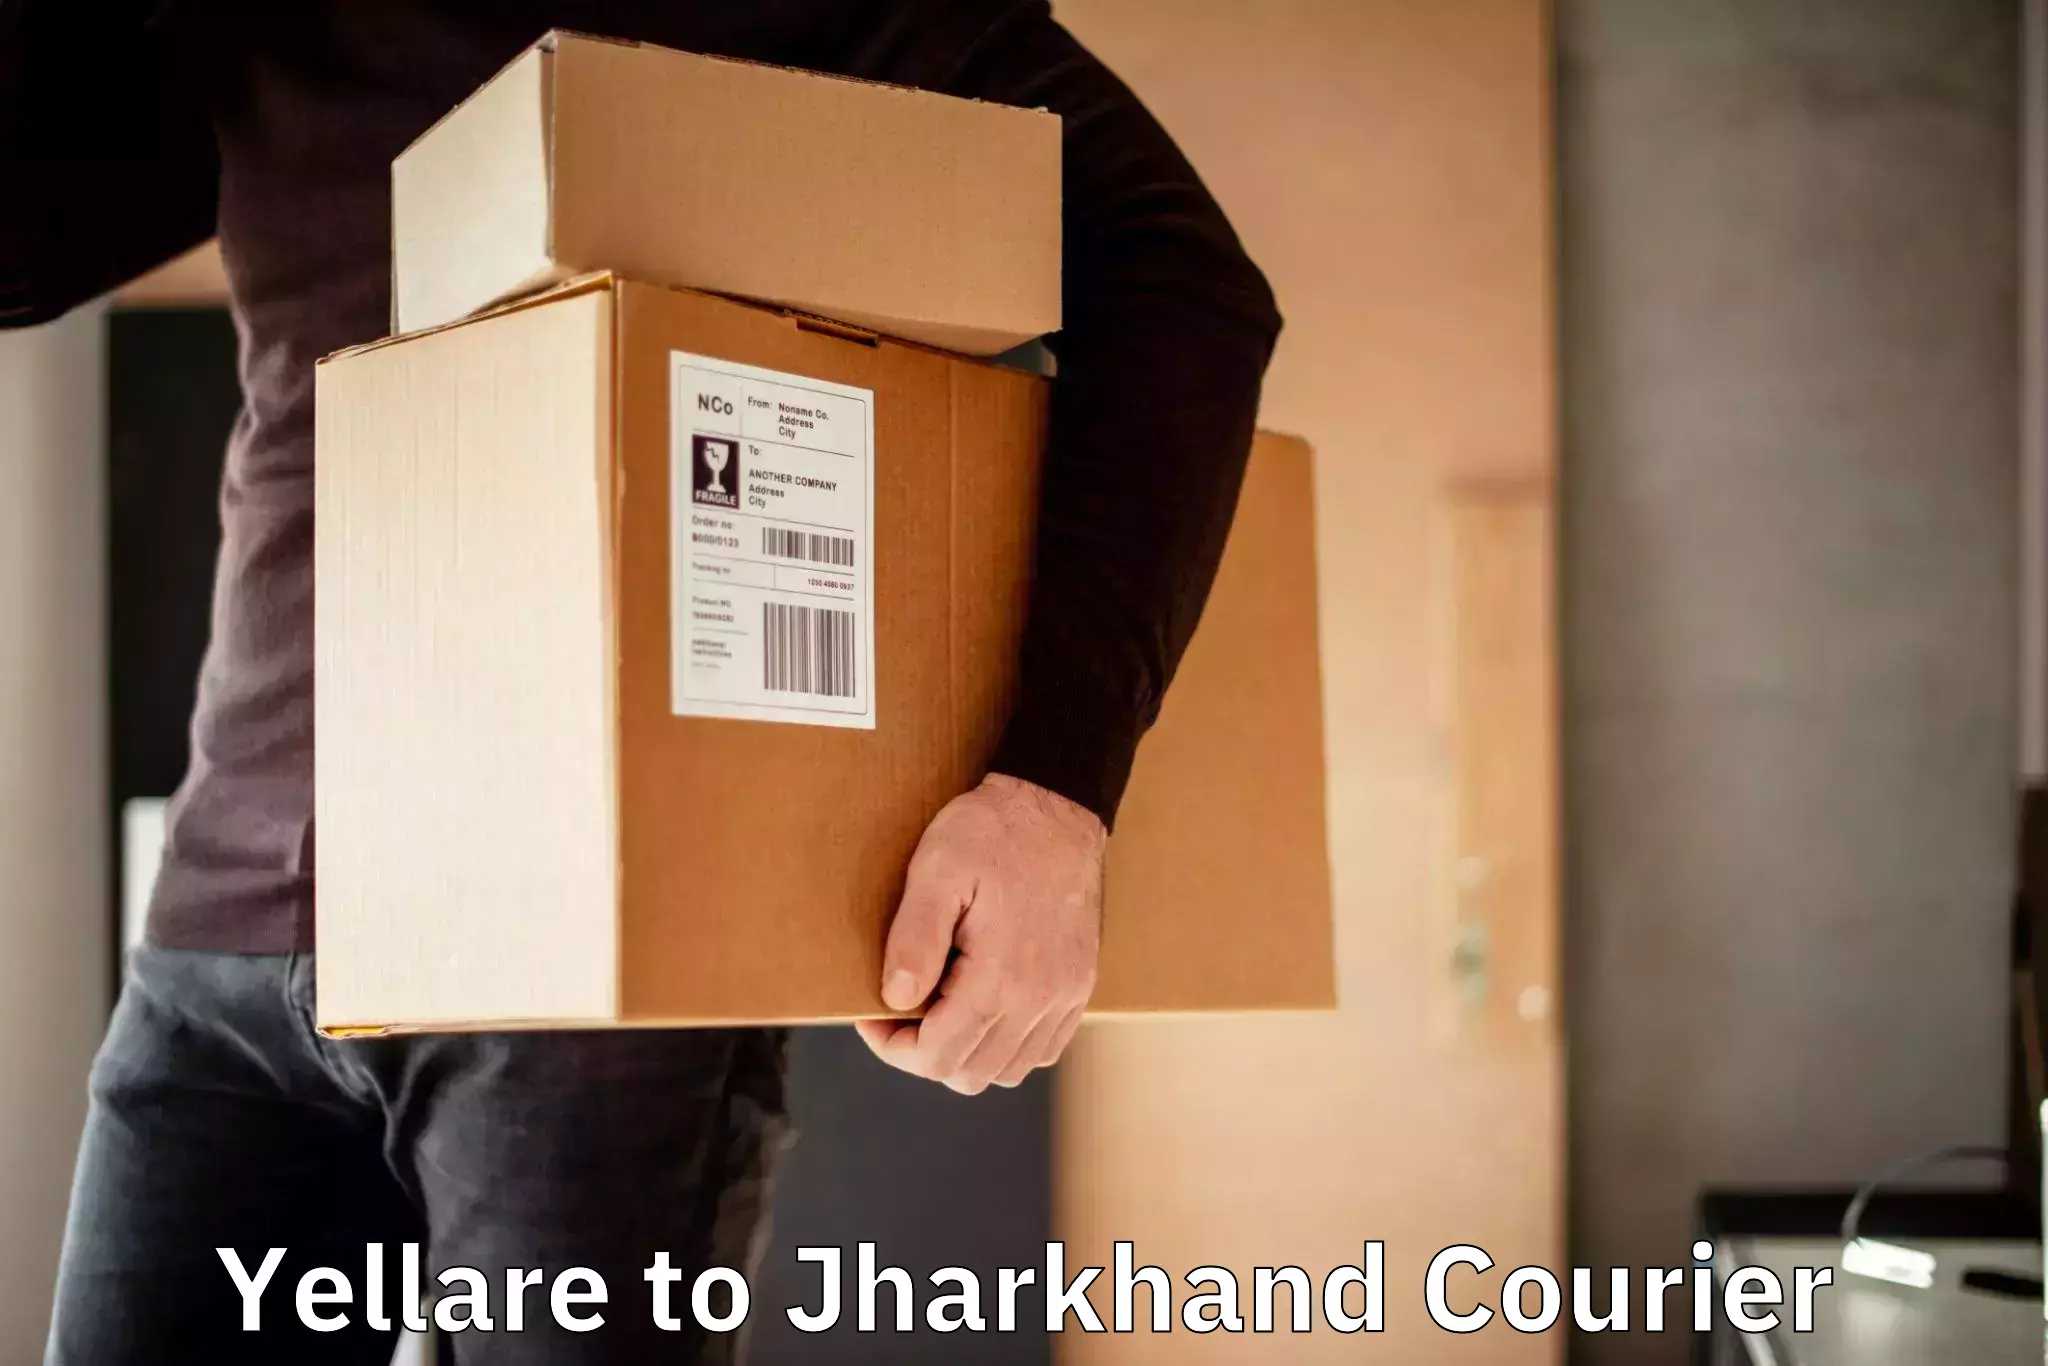 Next day courier Yellare to Jharkhand